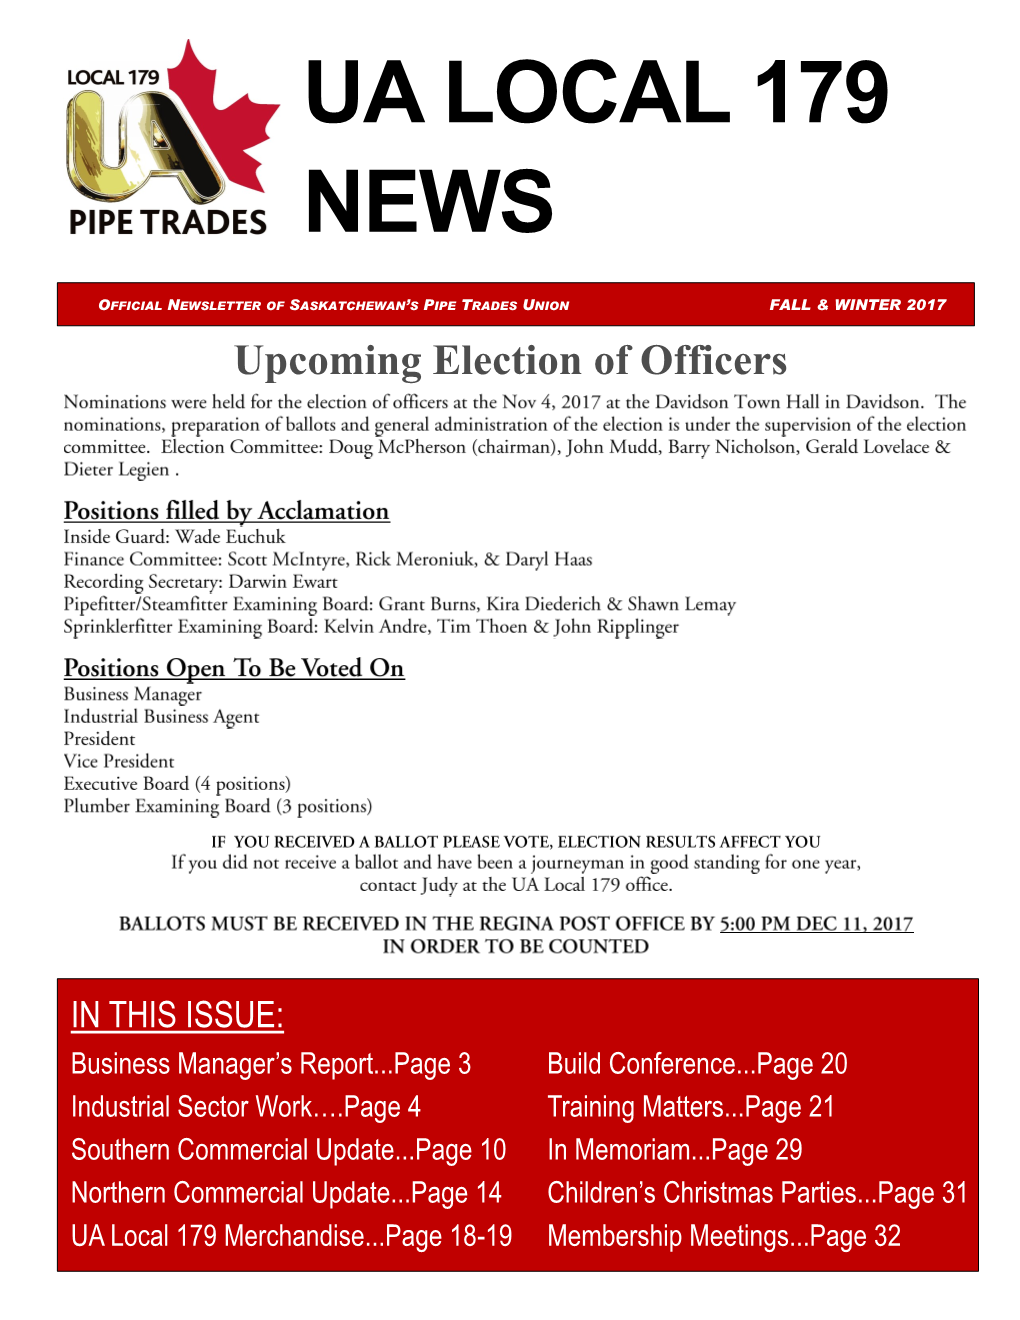 Upcoming Election of Officers